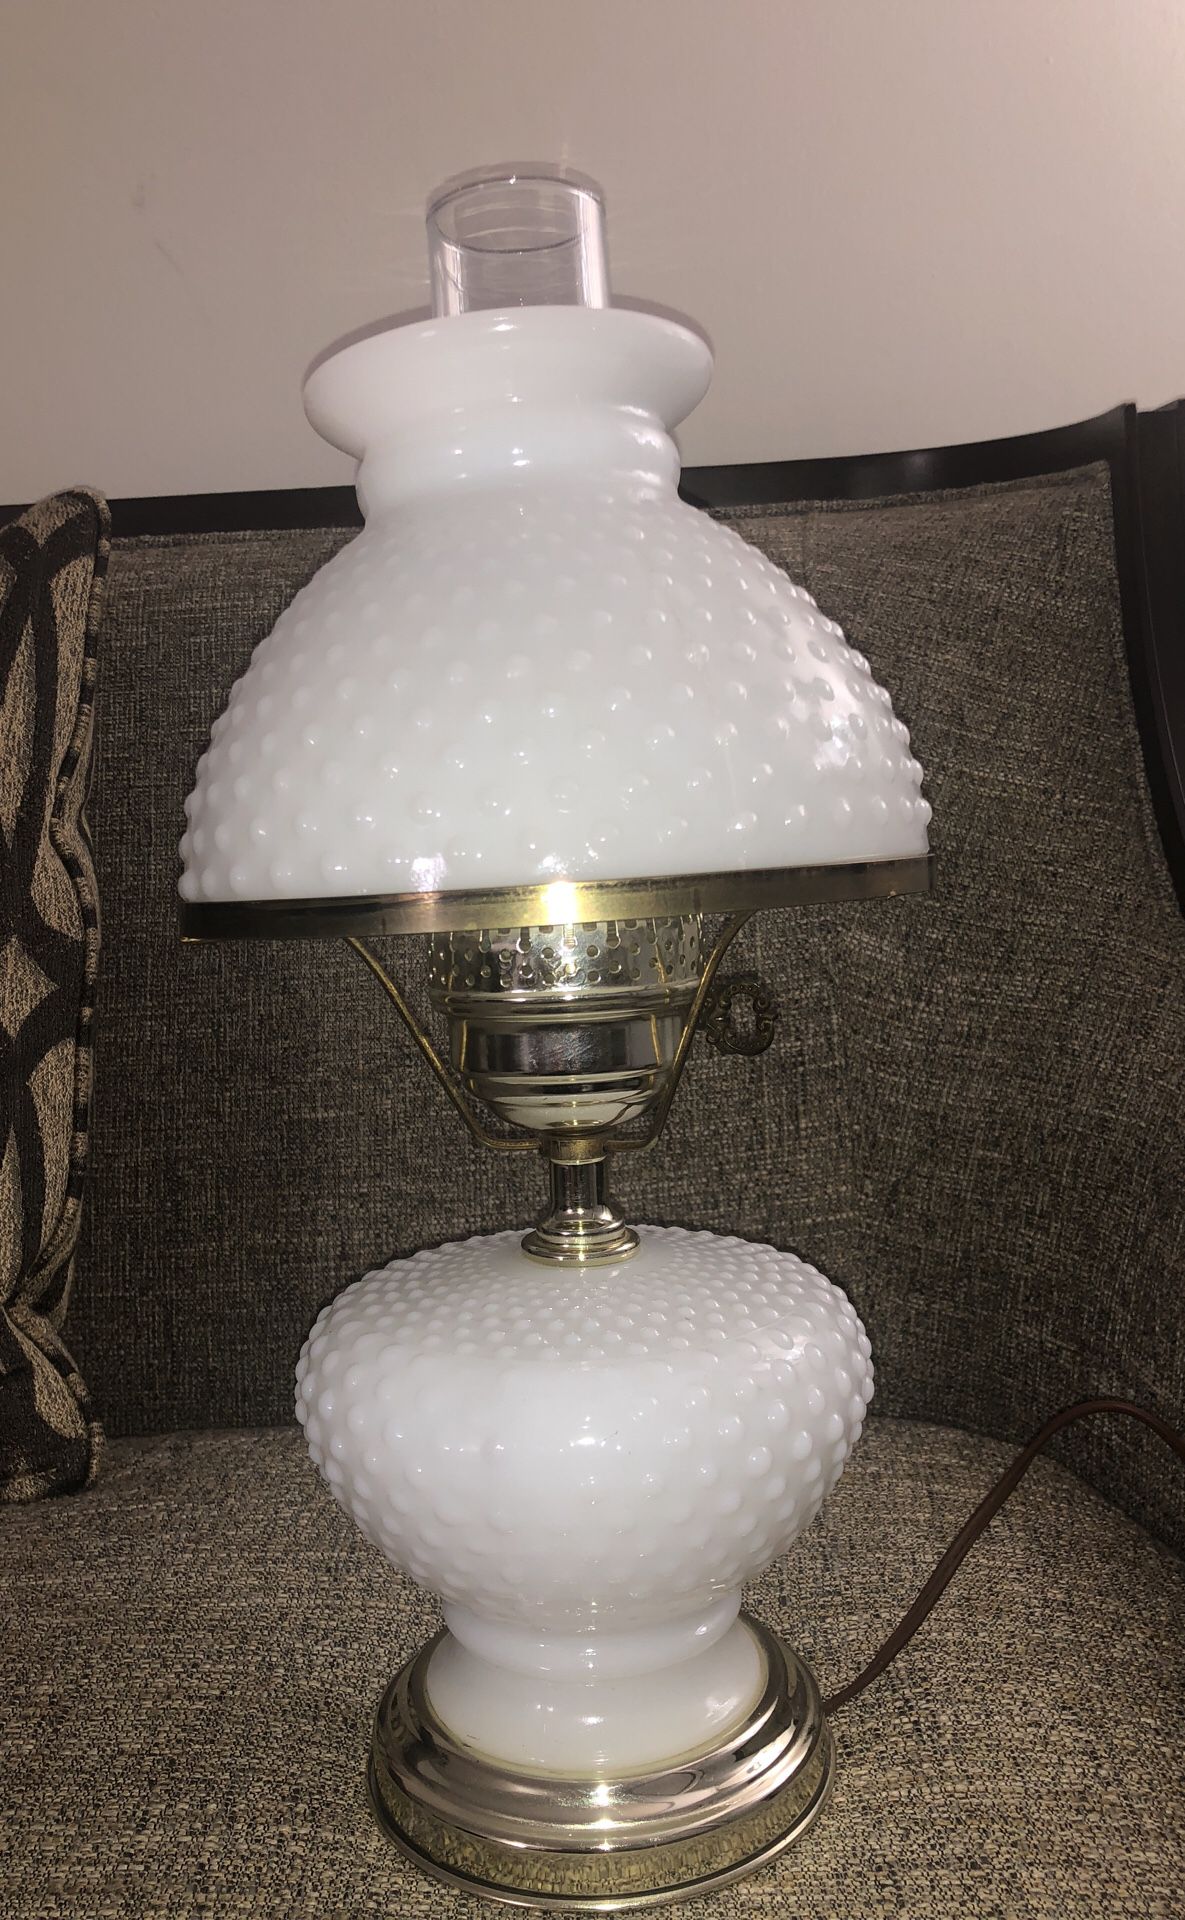 Vintage White Milk Glass Hobnail Hurricane Table Lamp Fenton. Please see all the pictures and read the description